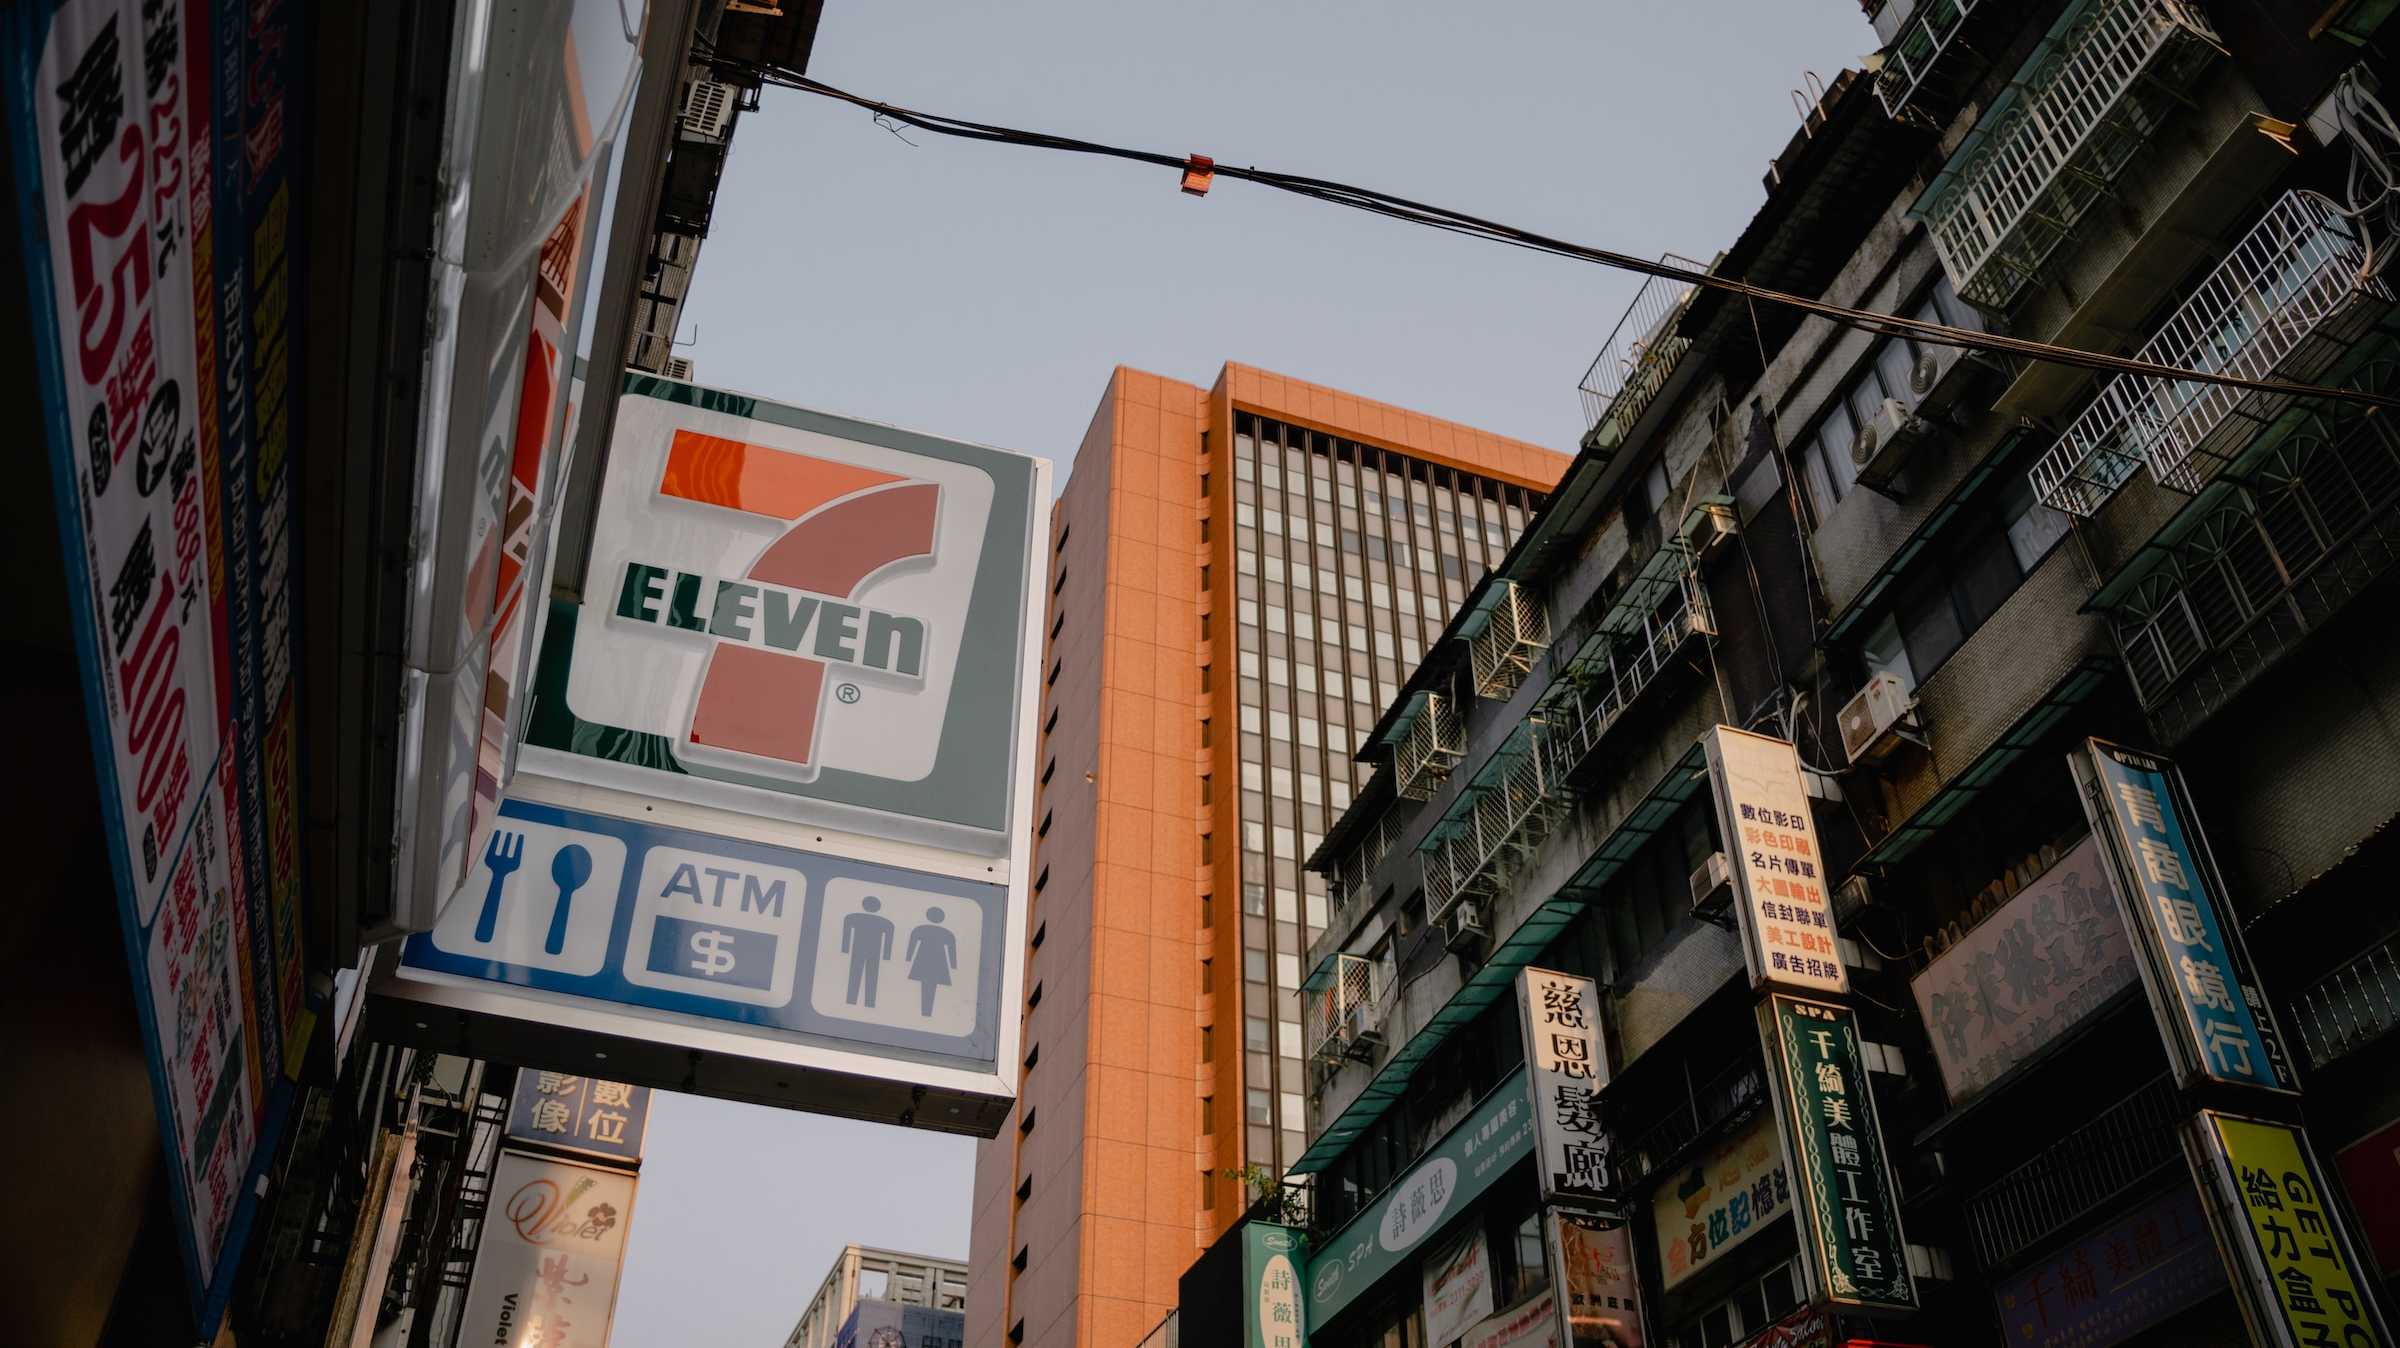 A 7-11 convenience store street sign in Taiwan.